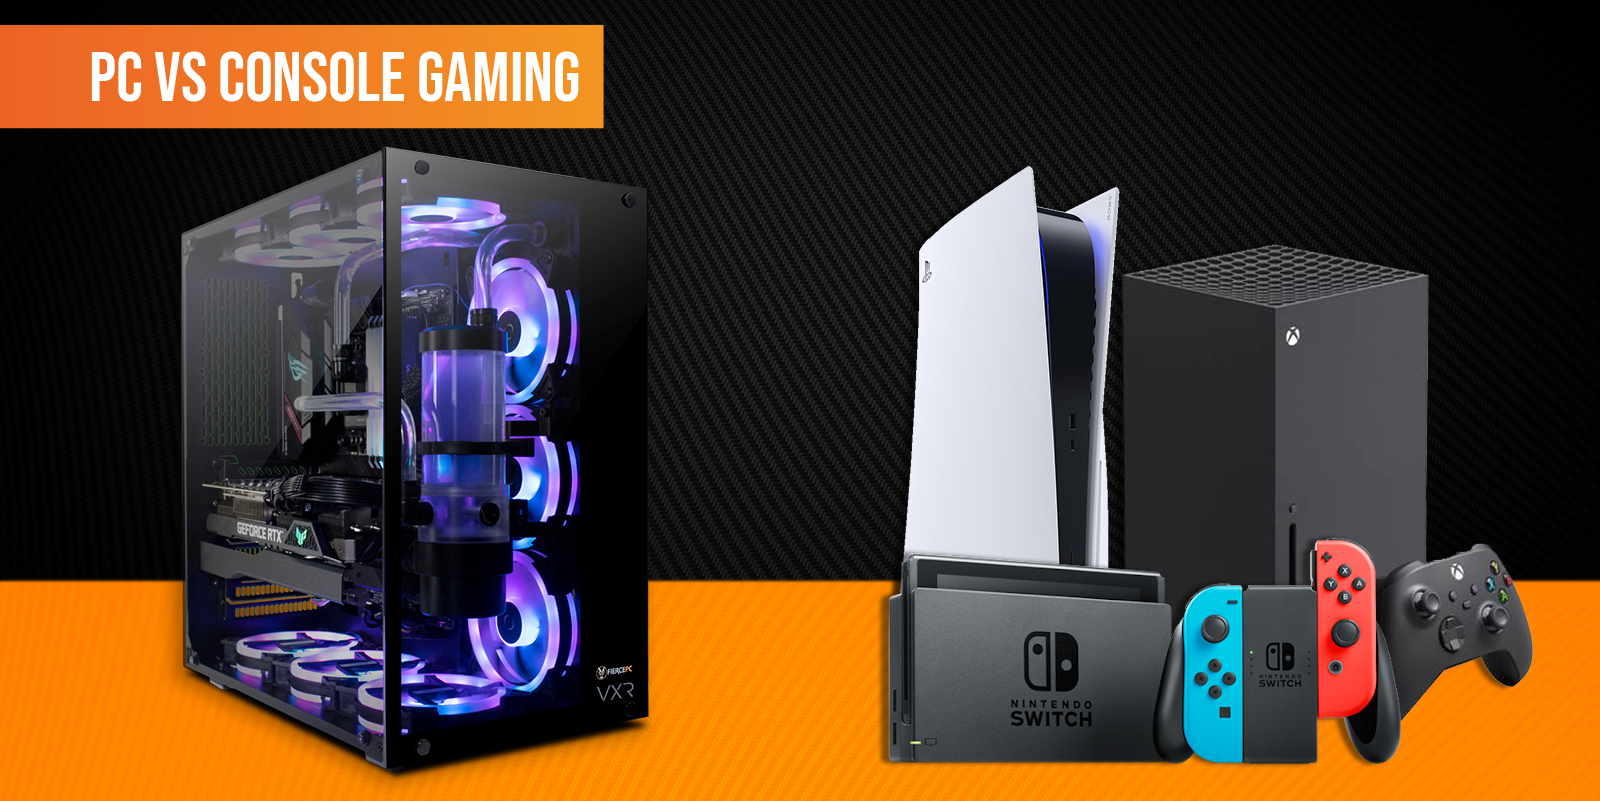 PC vs Console gaming, which should you choose?